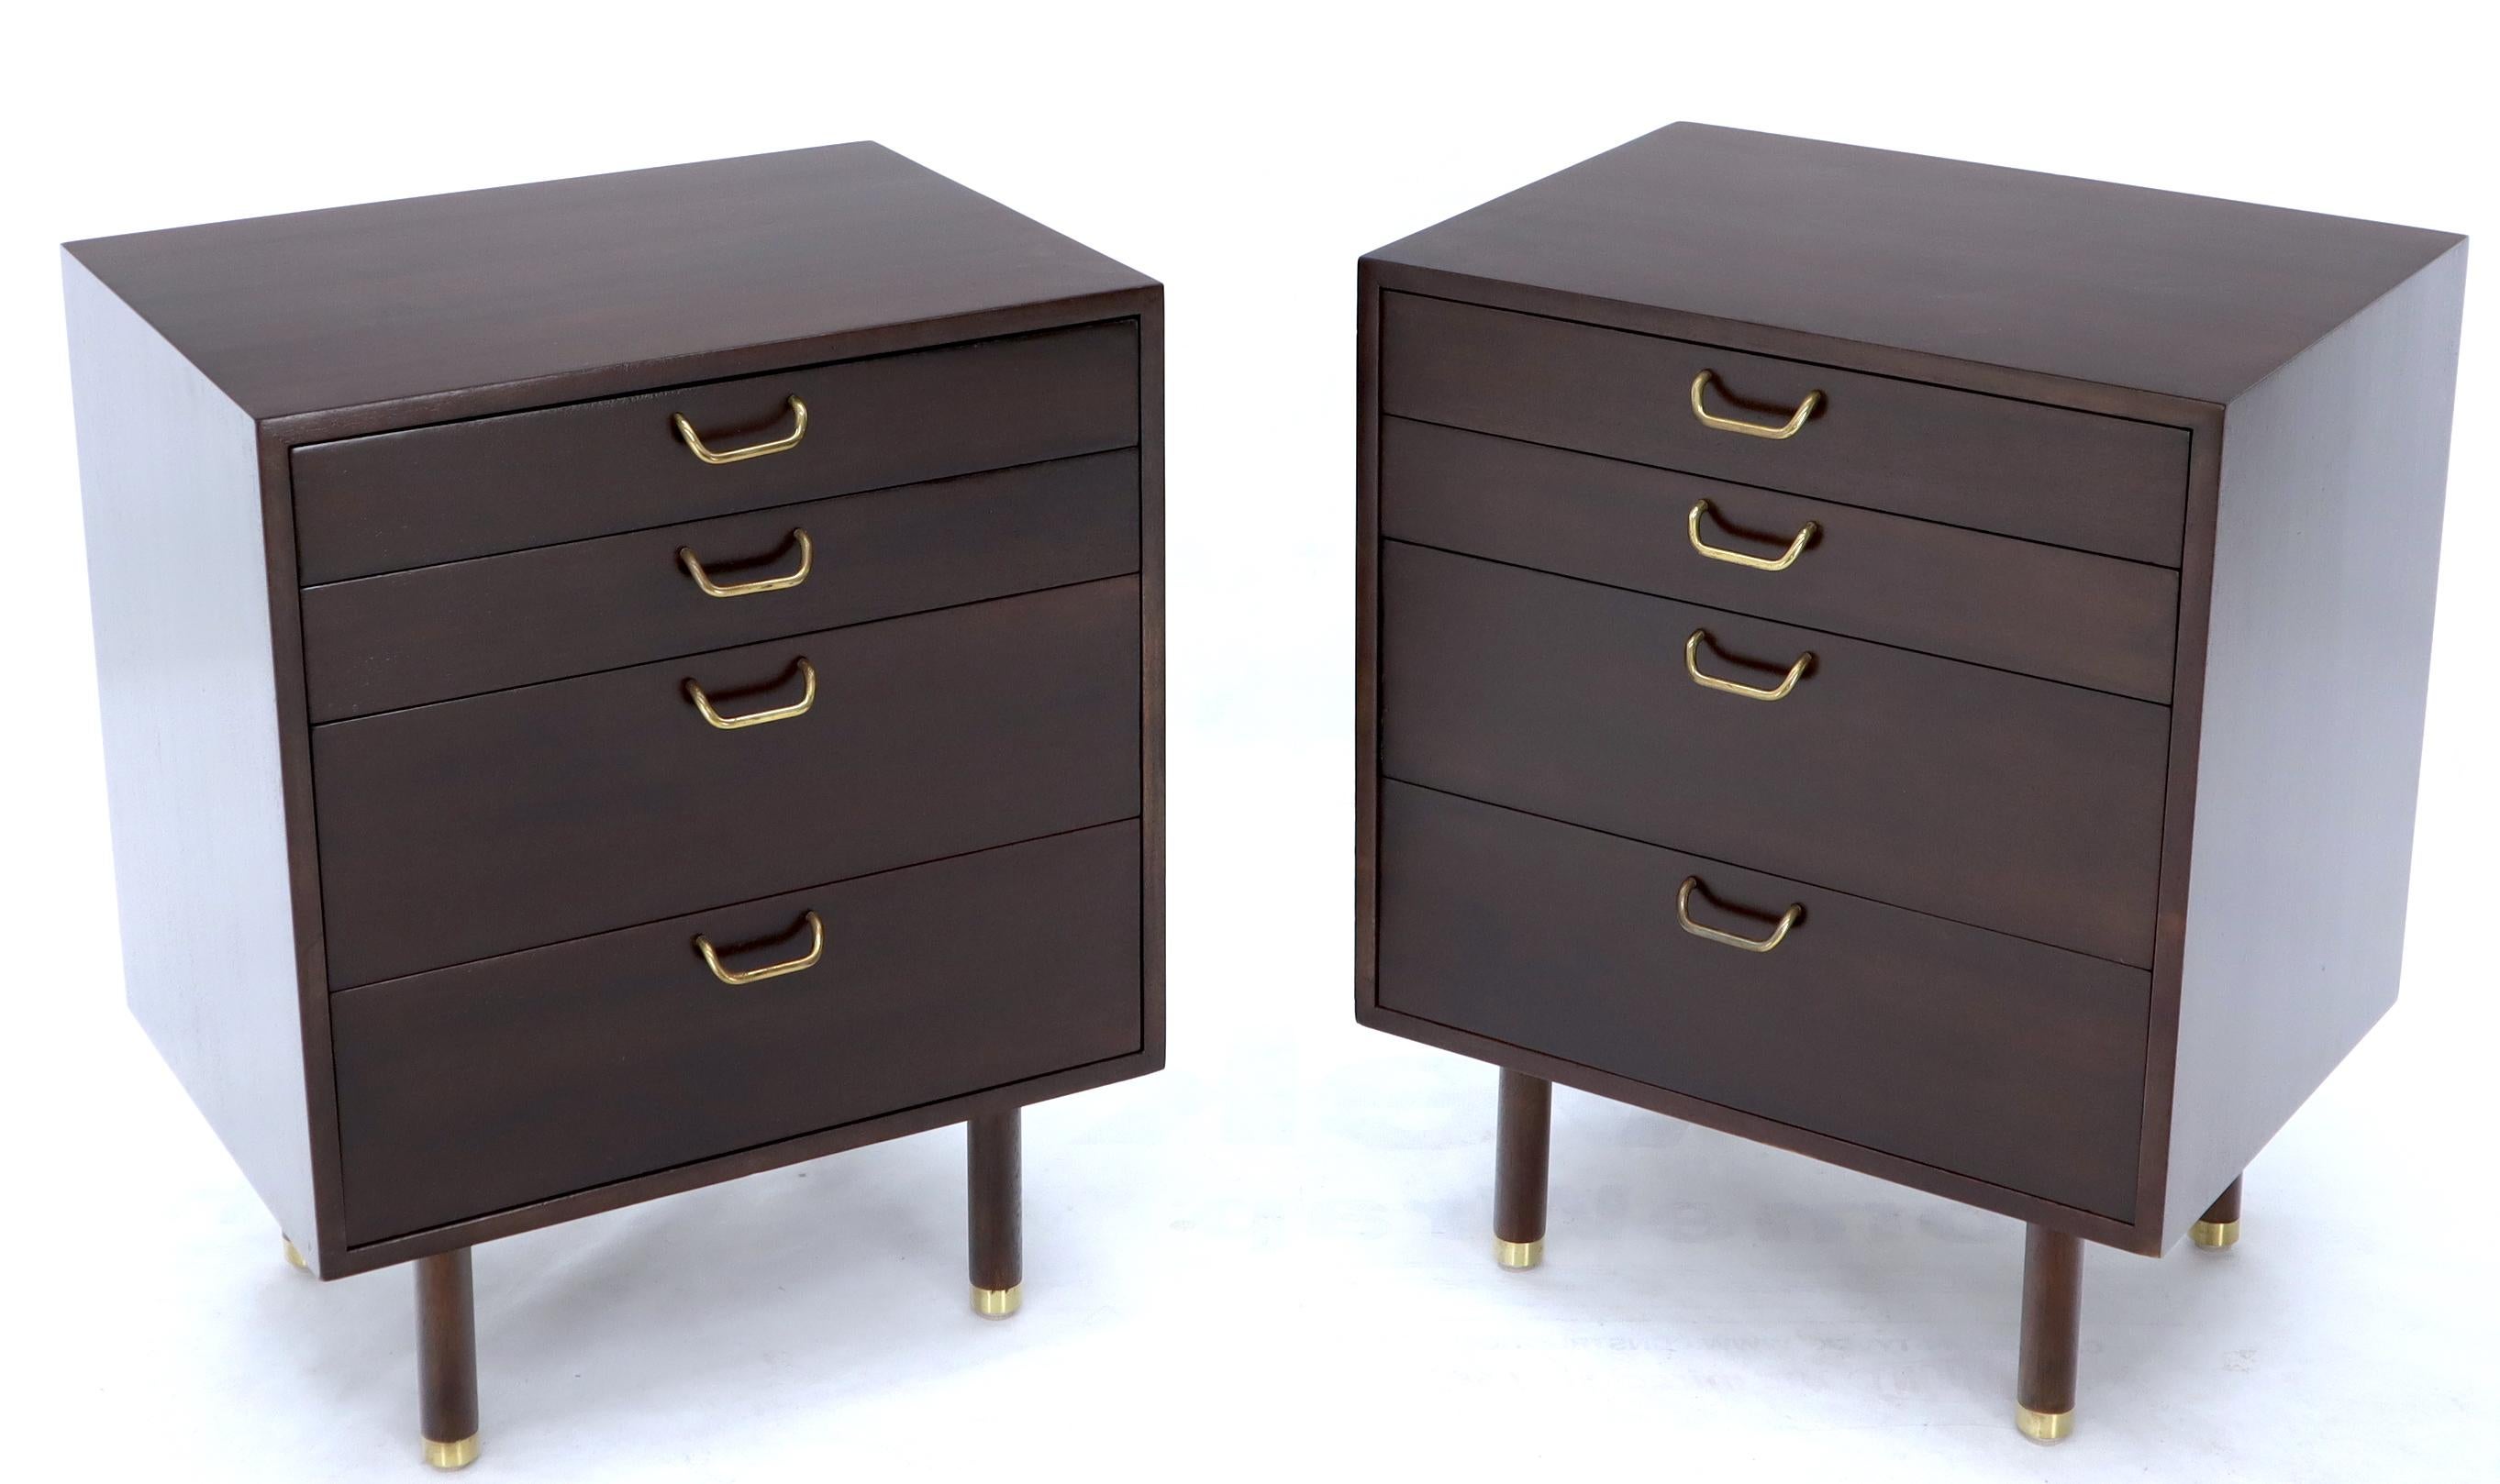 Pair of Mid-Century Modern 4 drawers nightstands side end tables cabinets with brass pulls by Harvey Probber. Dark brown chocolate mahogany finish.